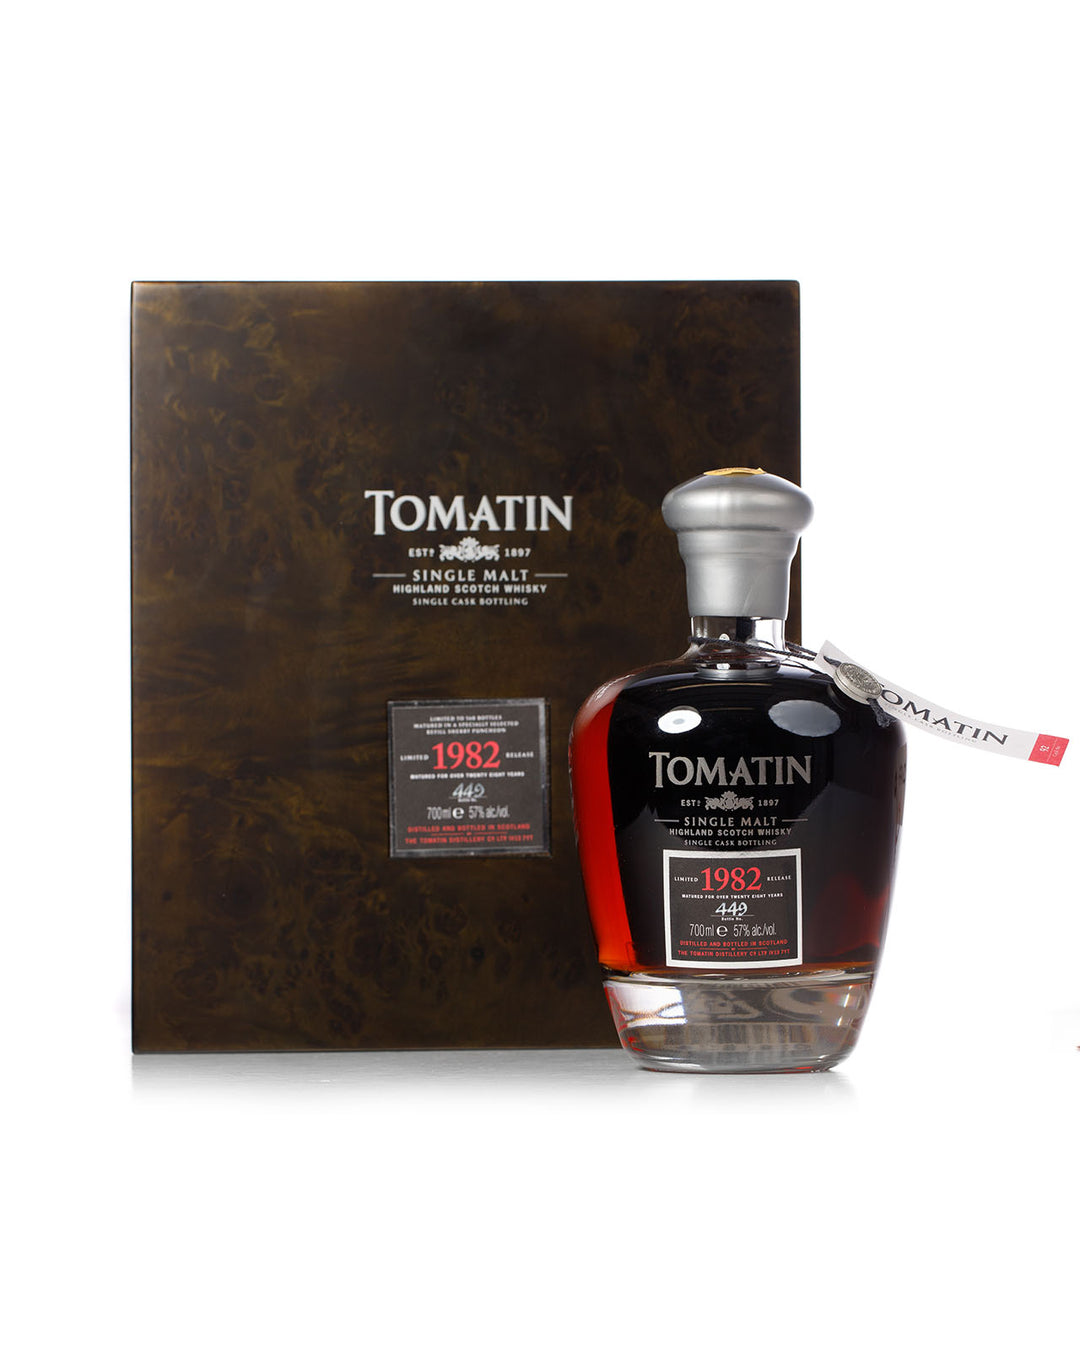 Tomatin 1982 28 Year Old Limited Release Bottled 2010 With Original Box Cask No. 92